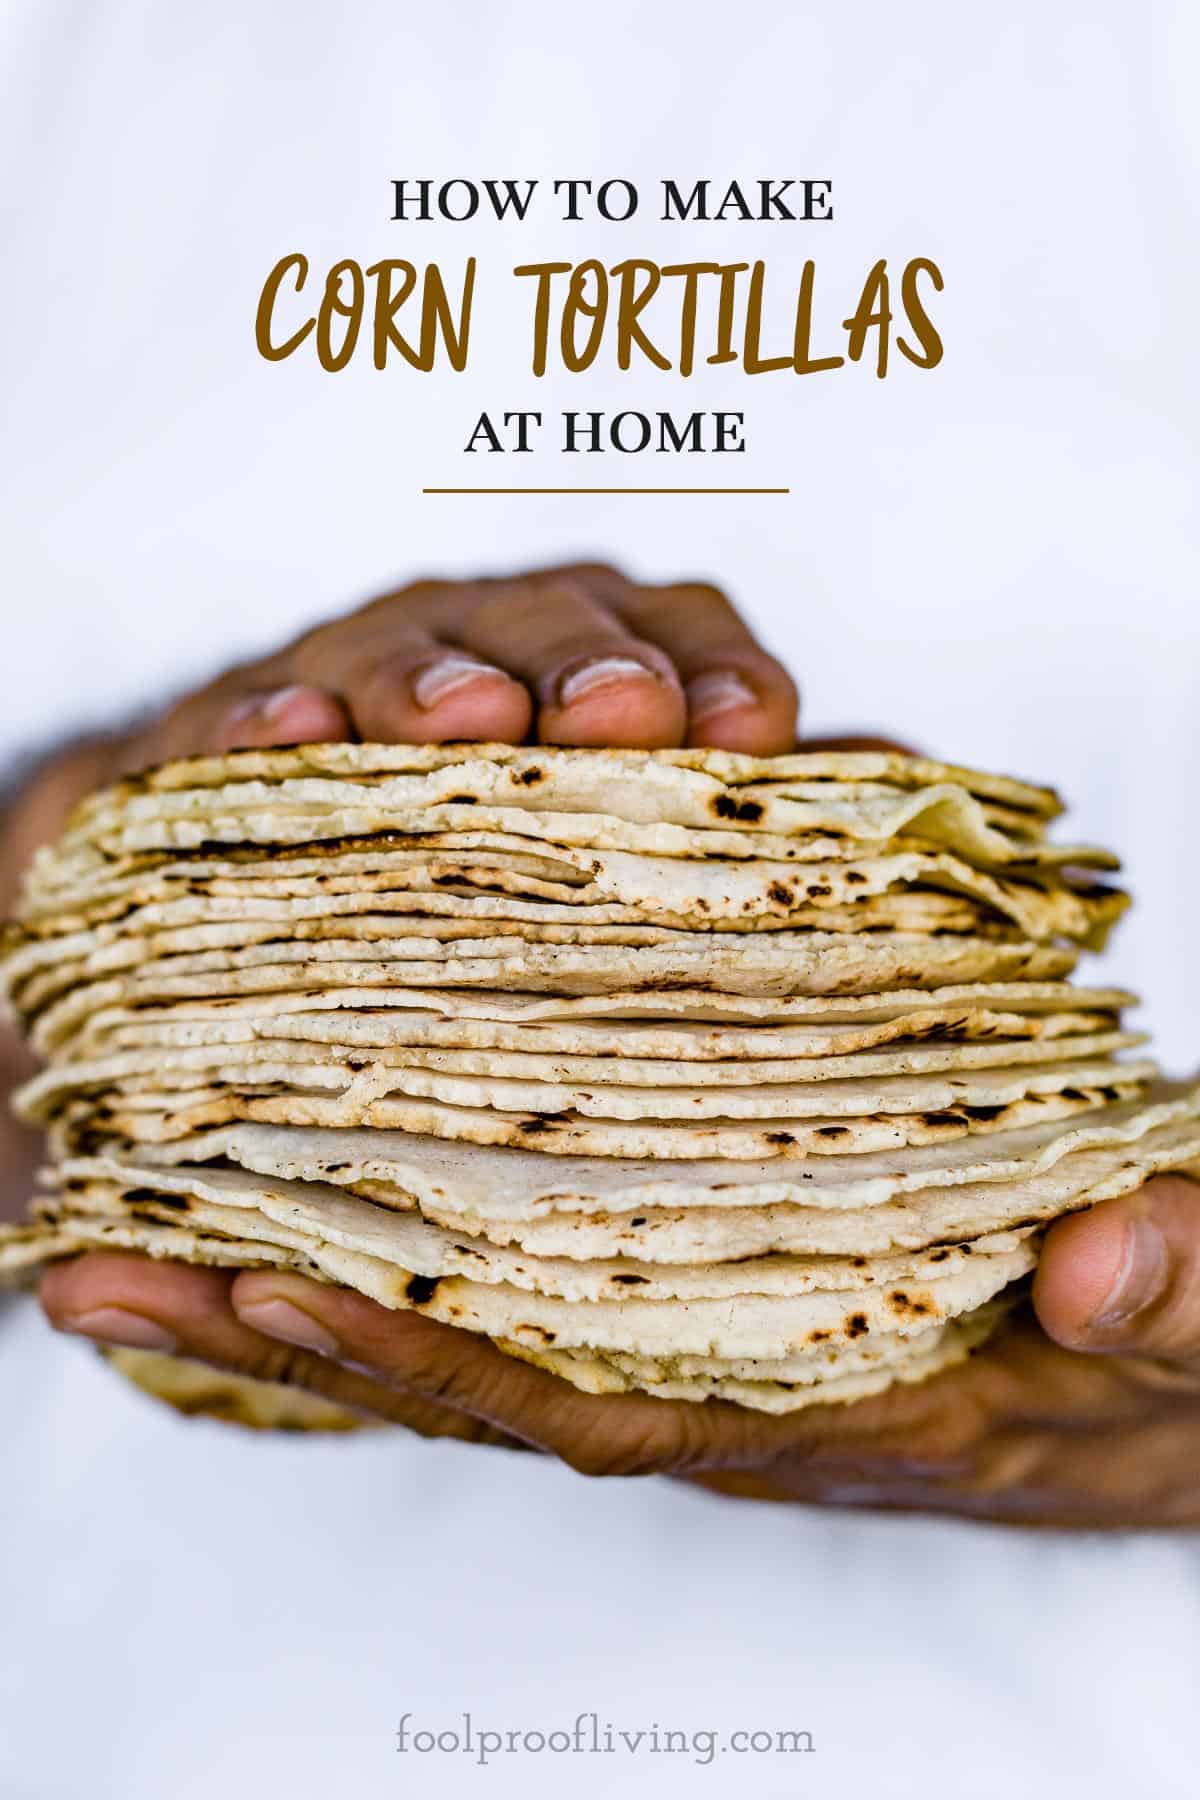 A man is serving corn tortillas placed on top of each other with text on the image